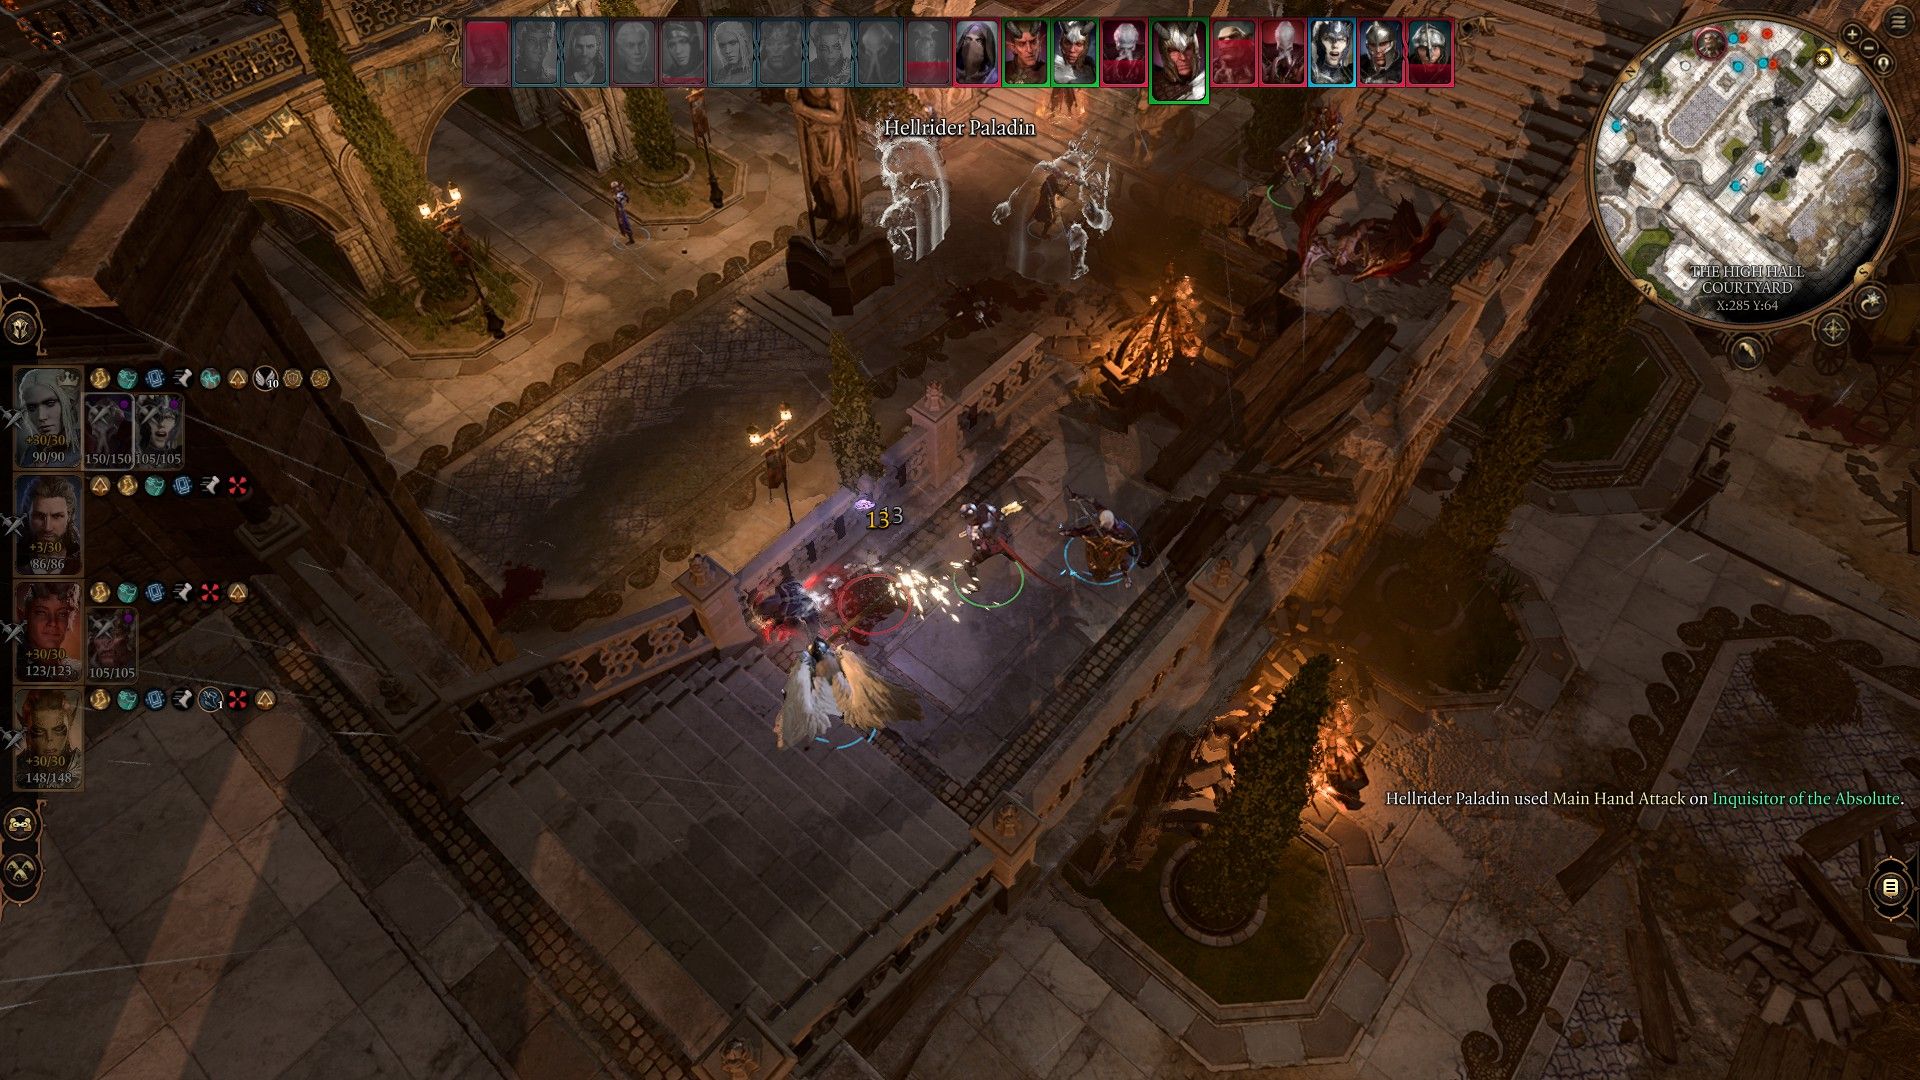 Allied Nightsong Dame Aylin strikes enemy with sword during fight at High Hall Courtyard in Baldur's Gate 3